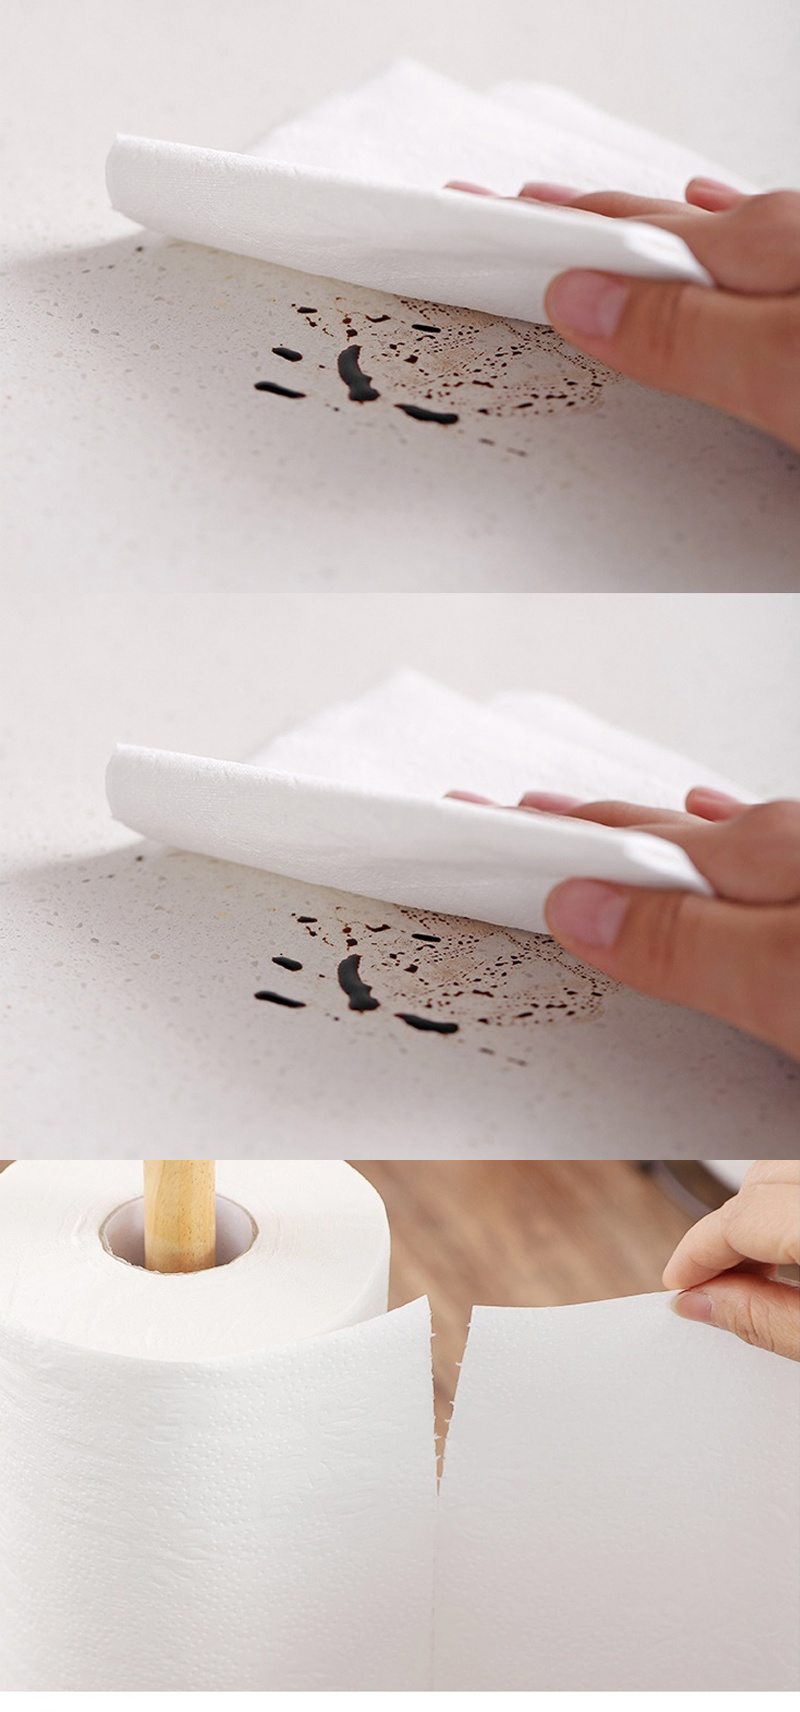 Hot Selling Hand Towel Kitchen Roll Towel Paper